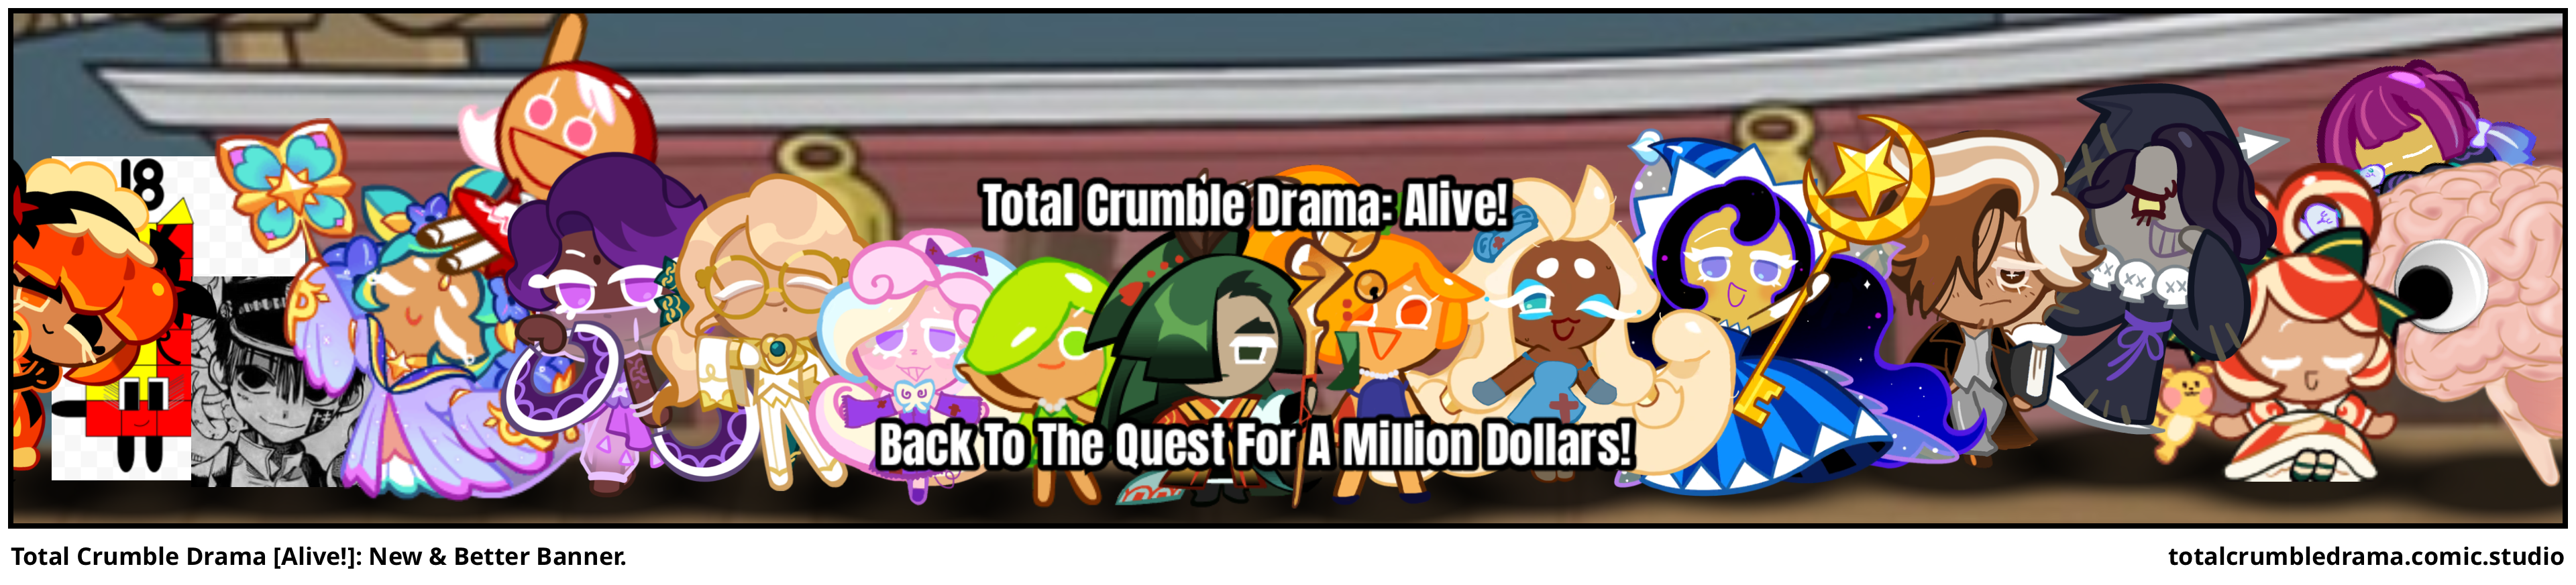 Total Crumble Drama [Alive!]: New & Better Banner.